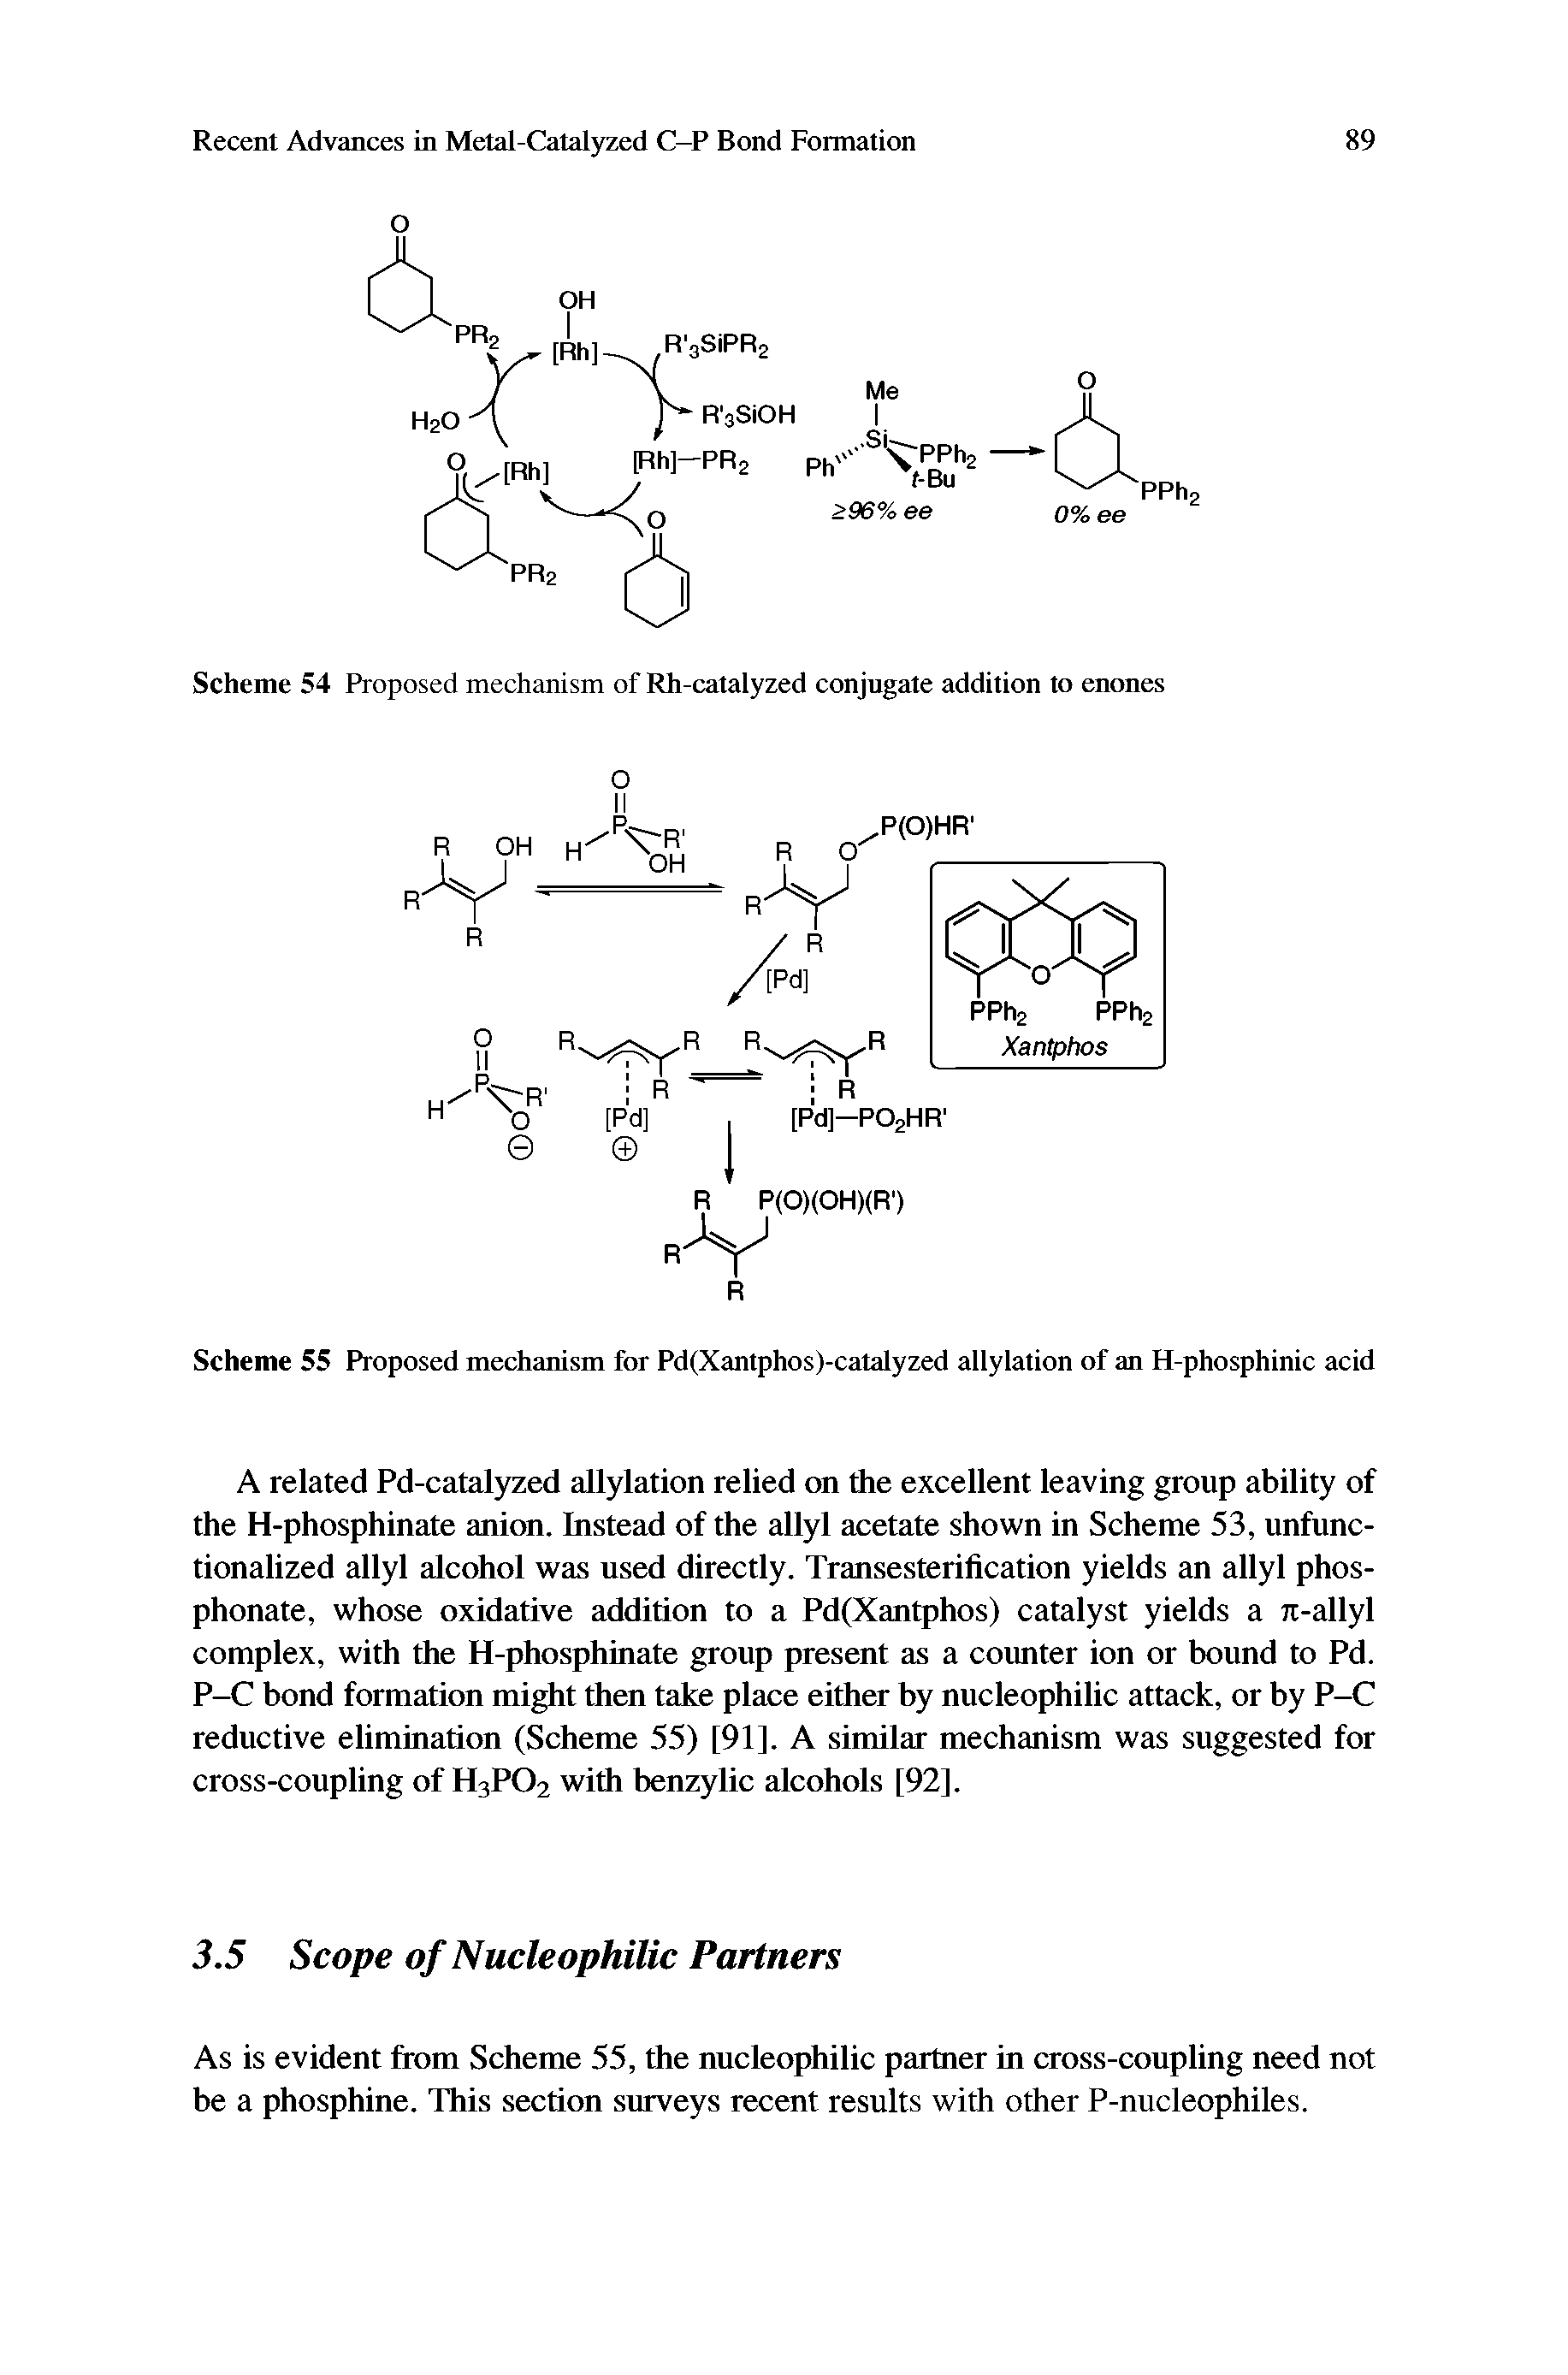 Scheme 54 Proposed mechanism of Rh-catalyzed conjugate addition to enones...